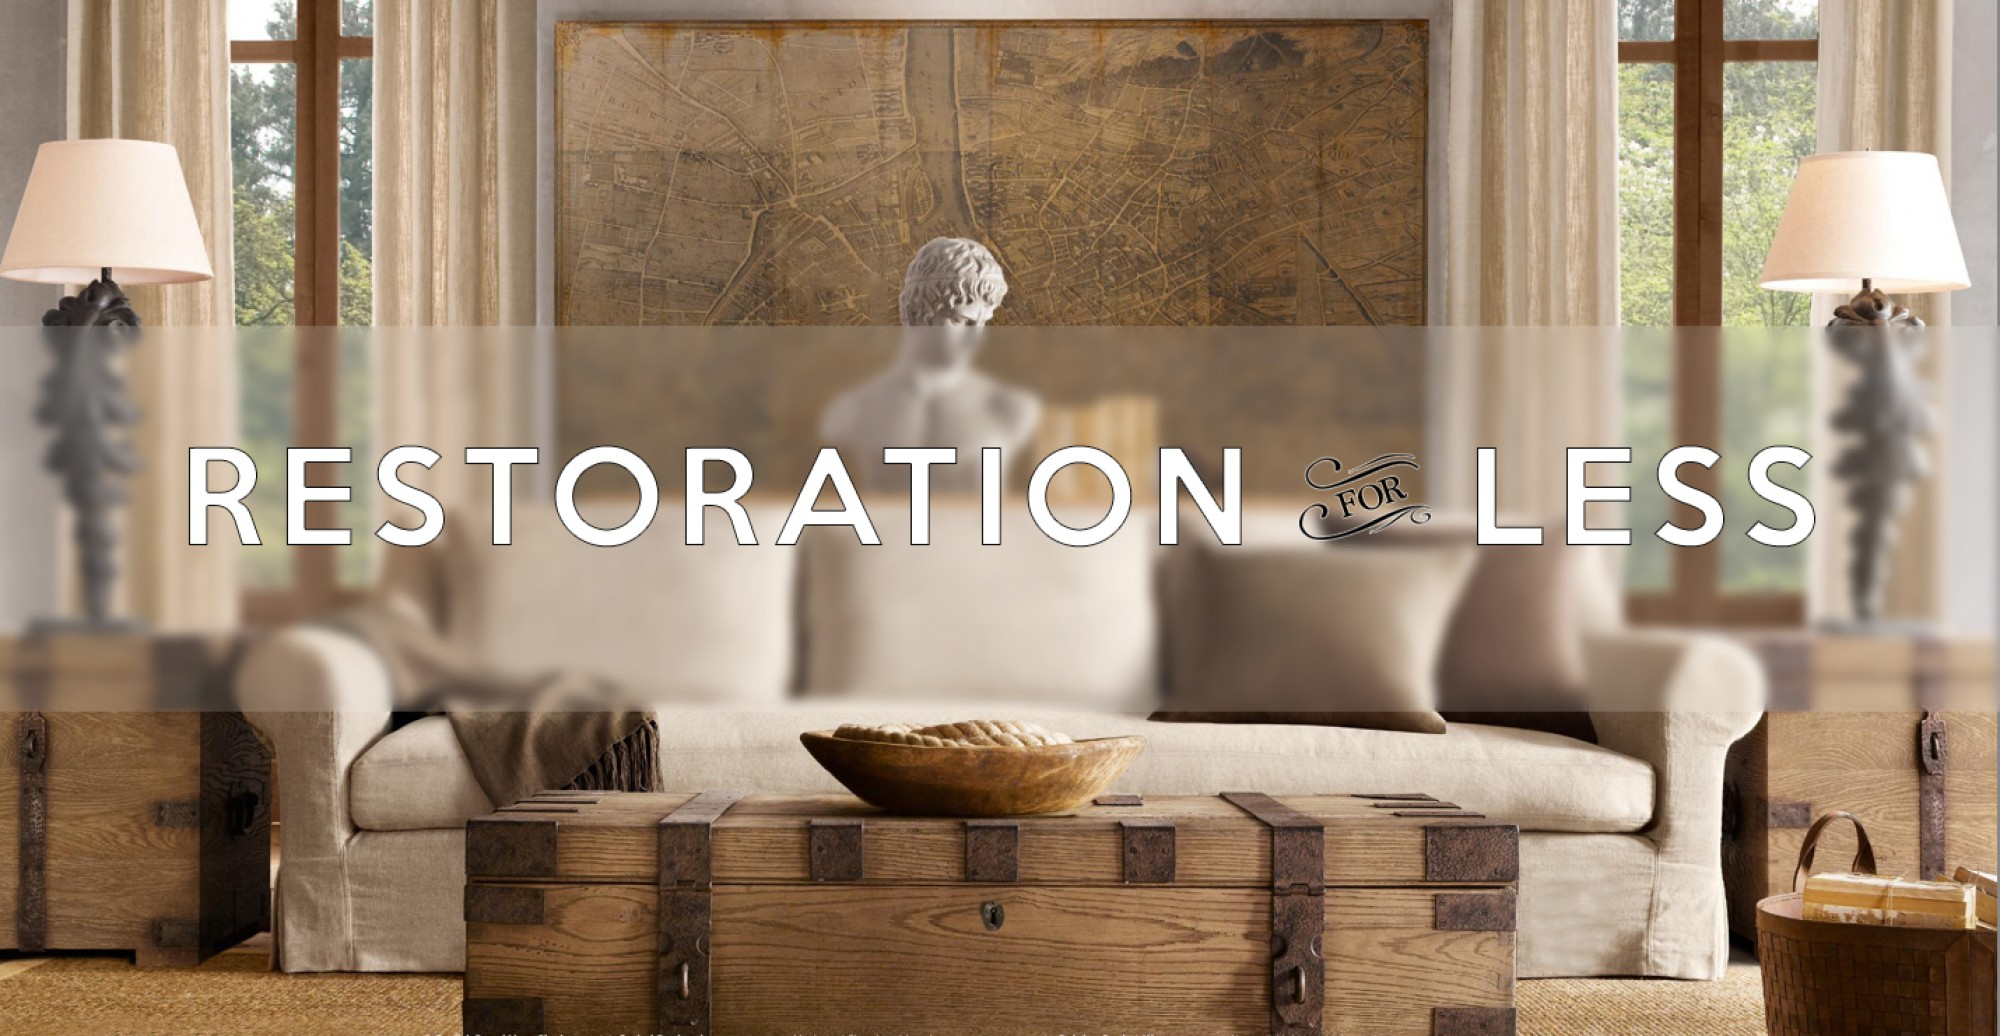 Restoration Hardware Style, Without The Price – Restoration intended for Restoration Hardware Style Furniture For Less